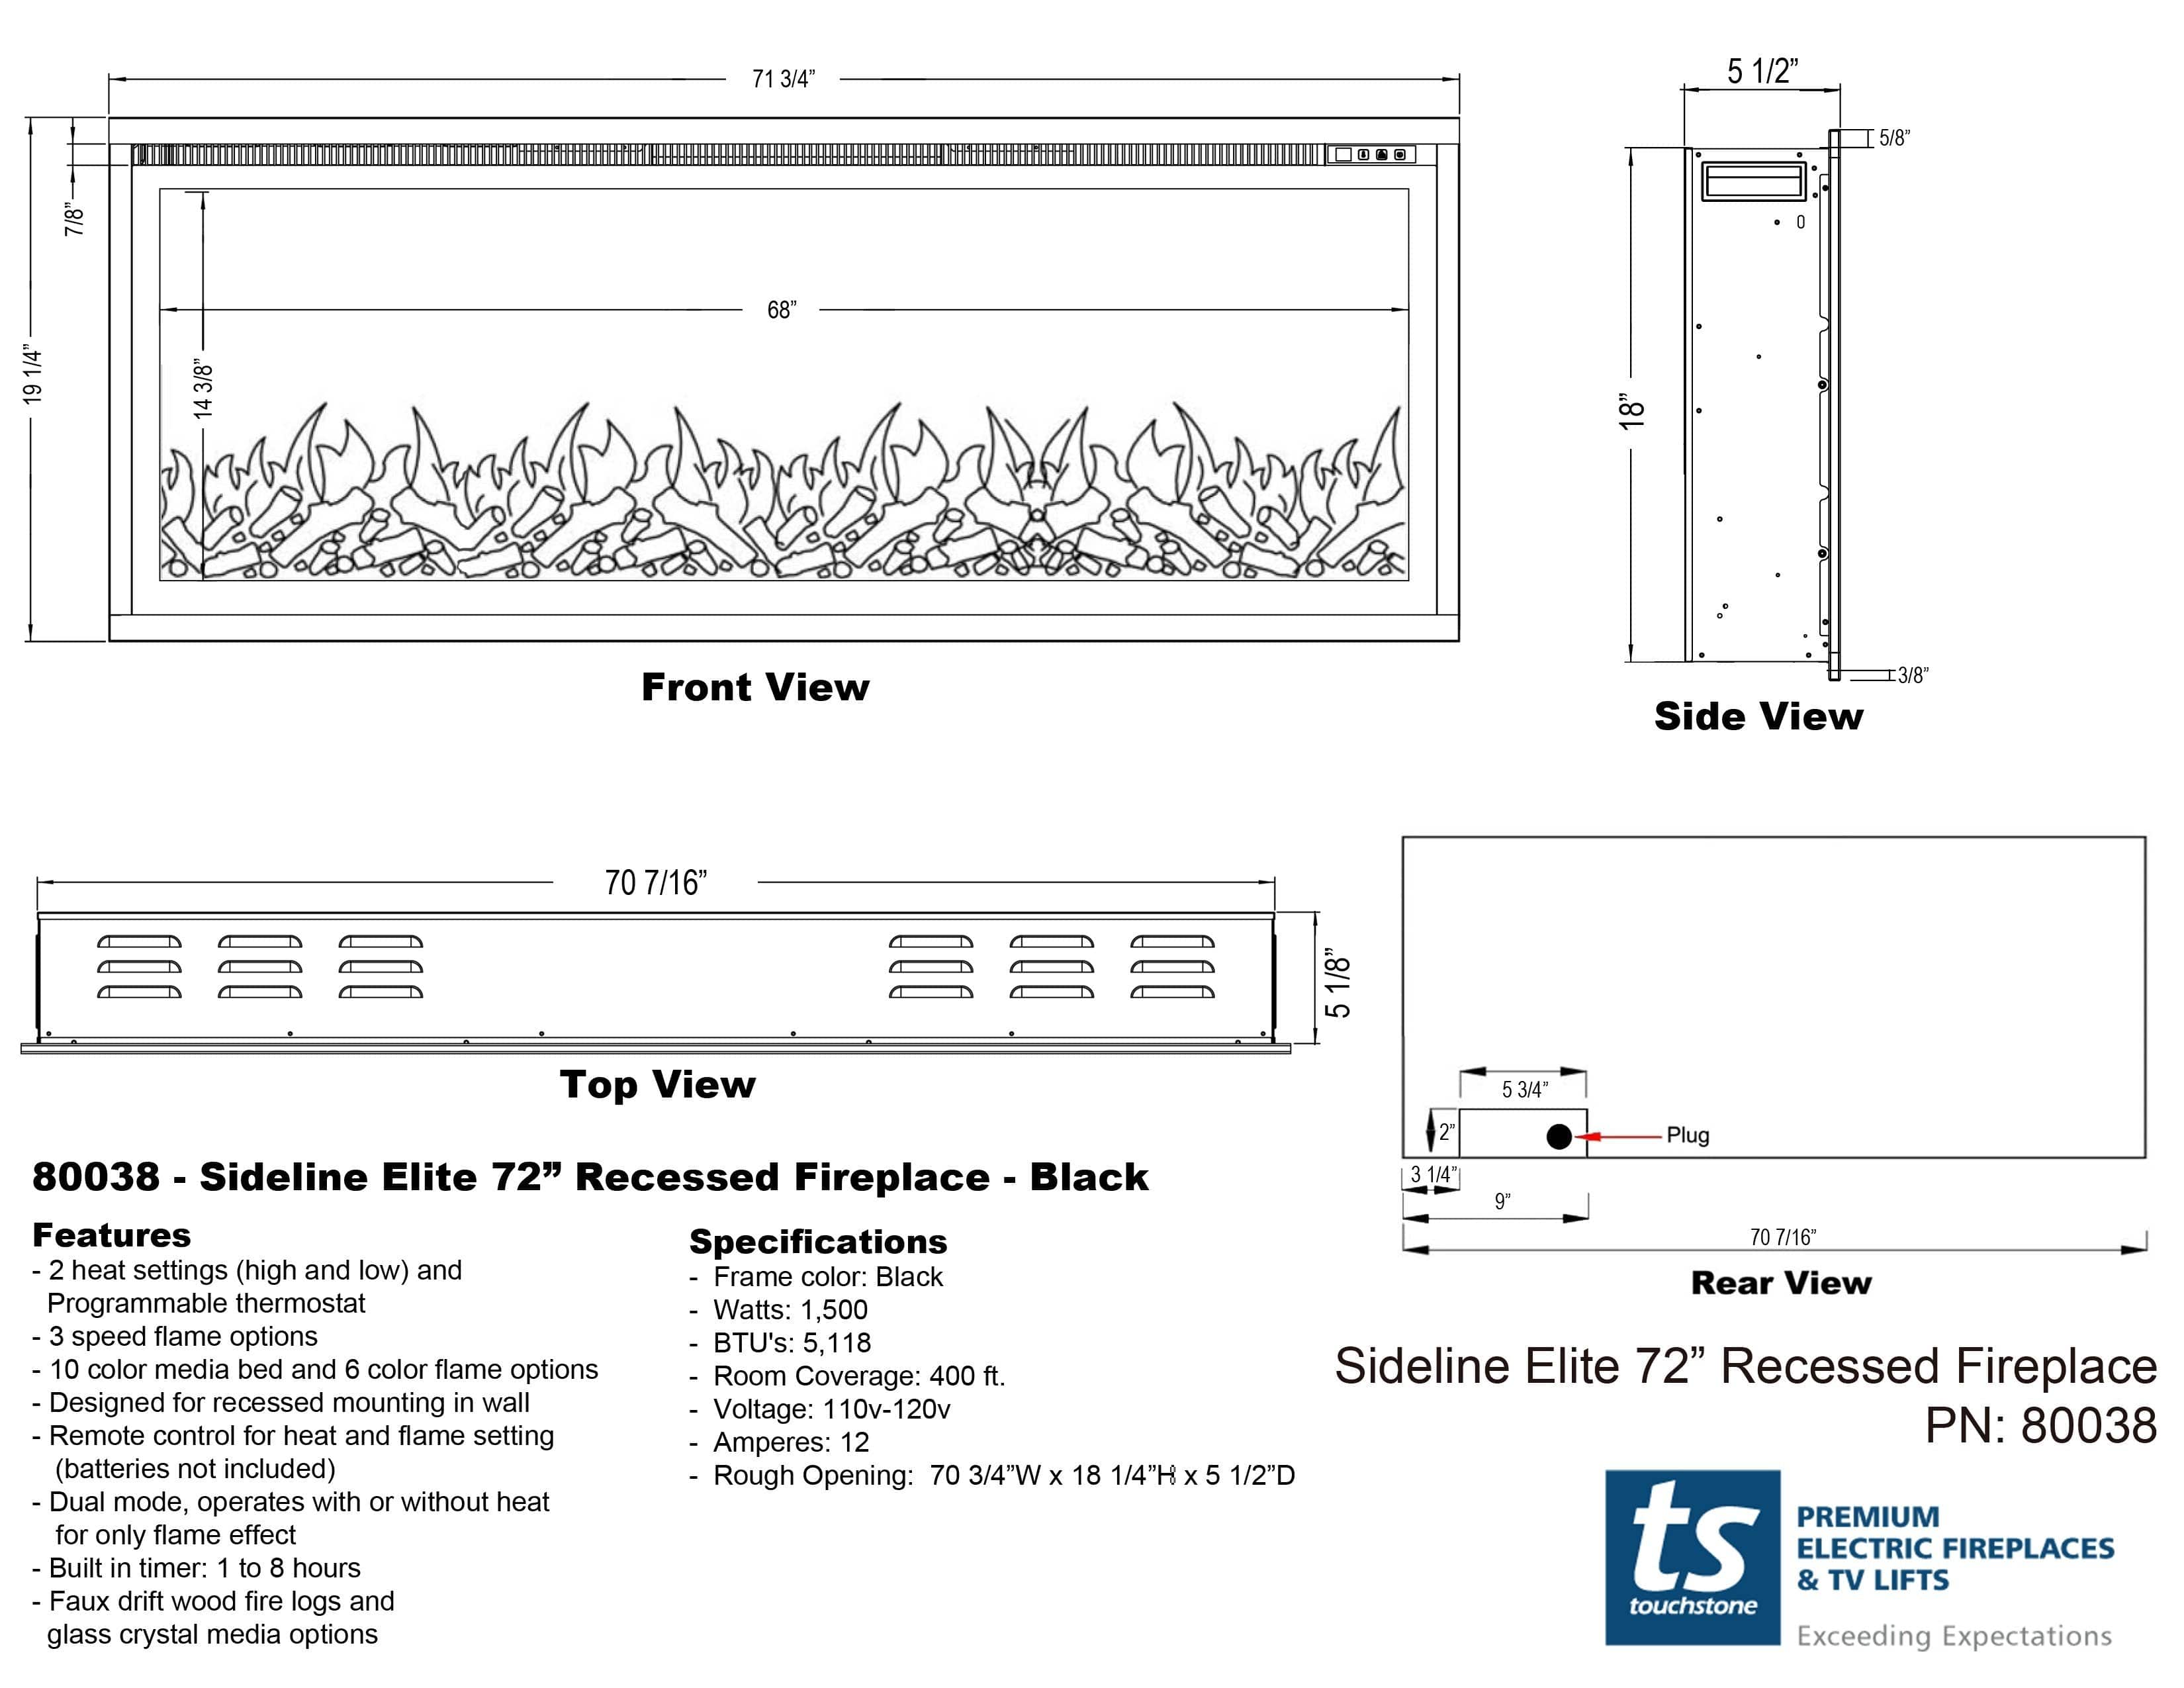 Sideline Elite Recessed Electric Fireplace specifications.